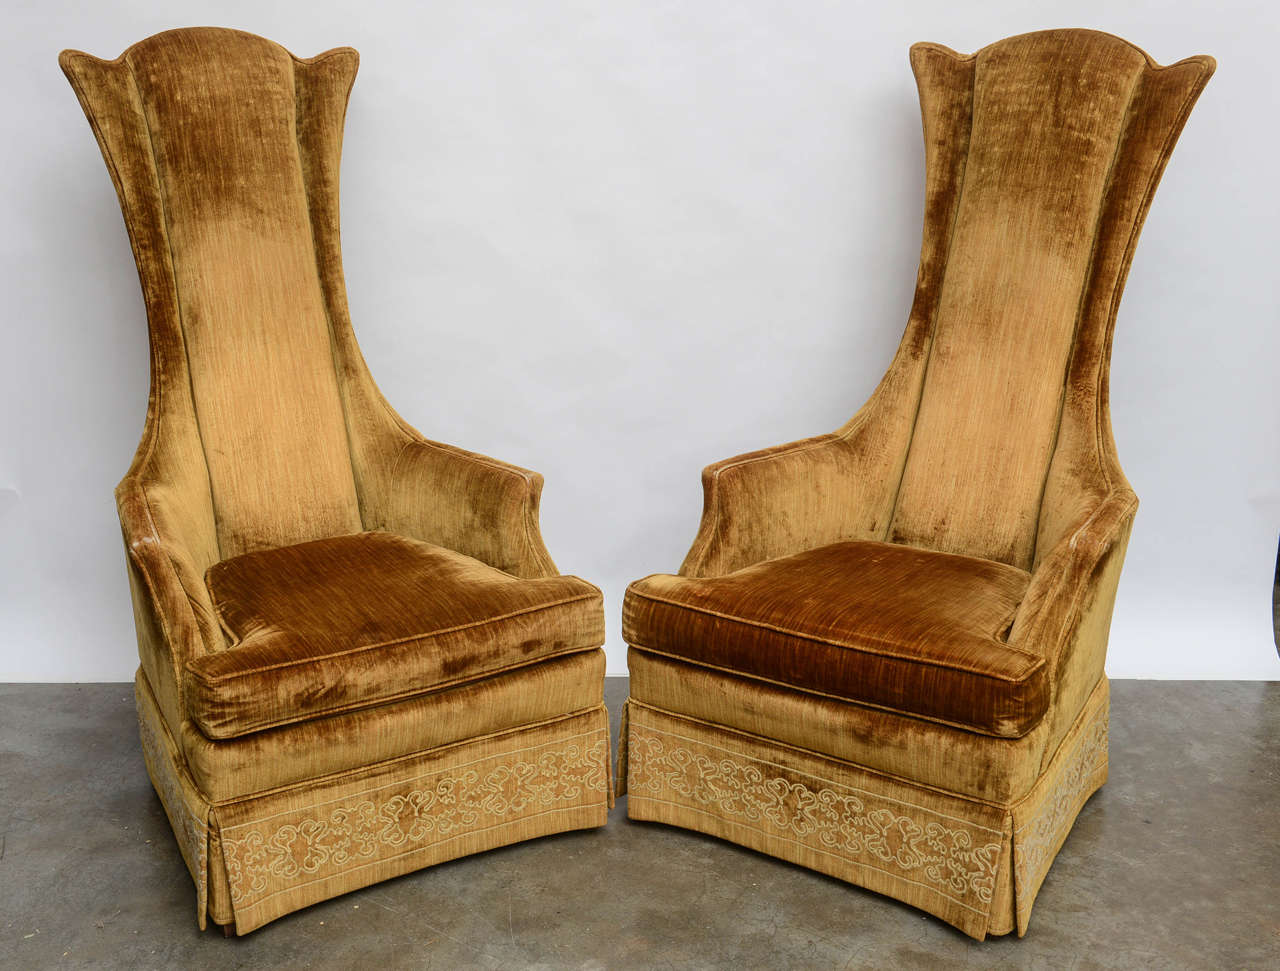 Impressive and chic pair of mid century modern stylized wingback chairs. Fantastic lines.